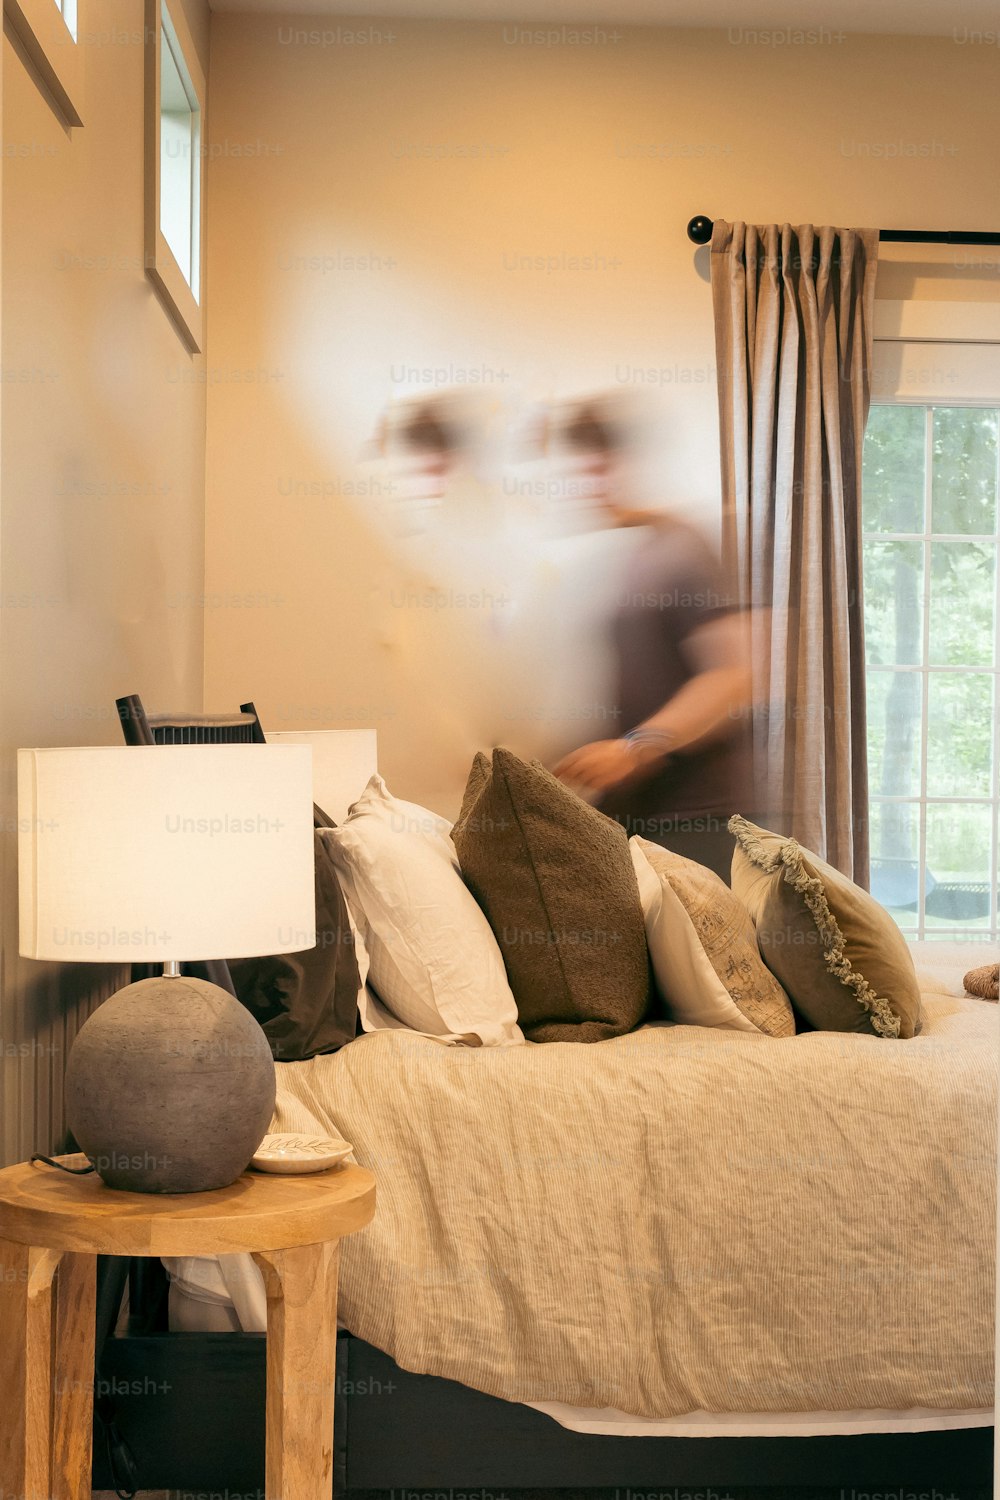 a blurry image of a person in a bedroom